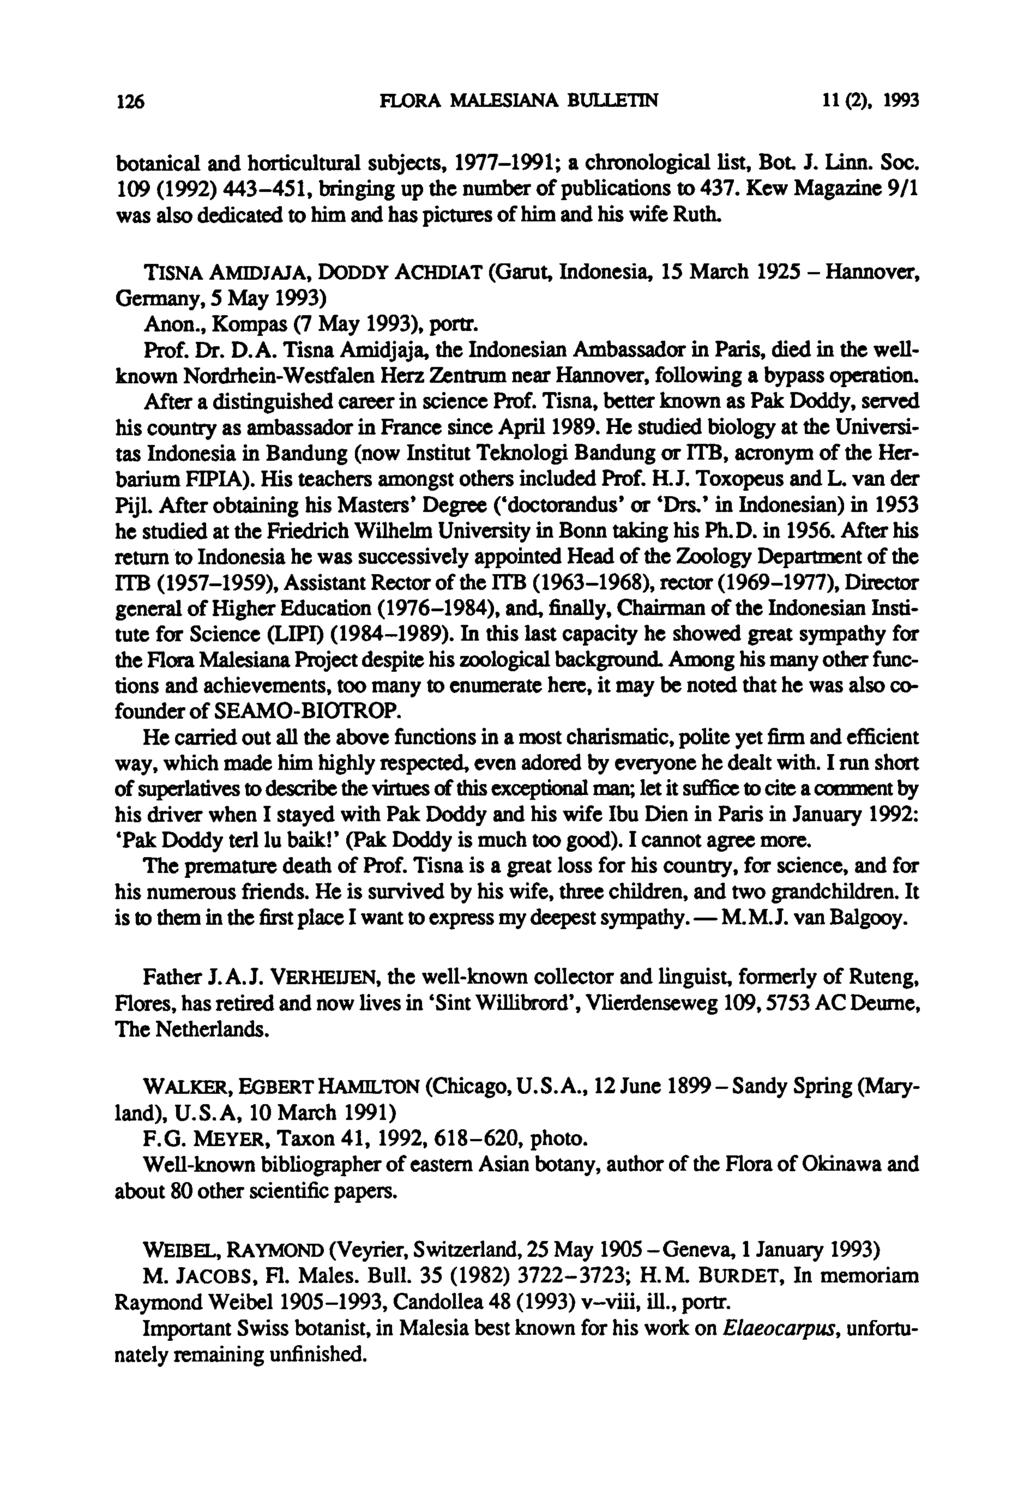 M. 126 FLORA MALESIANA BULLETIN 11(2), 1993 botanical and horticultural subjects, 1977 1991; a chronological list, Bot. J. Linn. Soc. 109 (1992) 443-451, bringing up the numberof publications to 437.